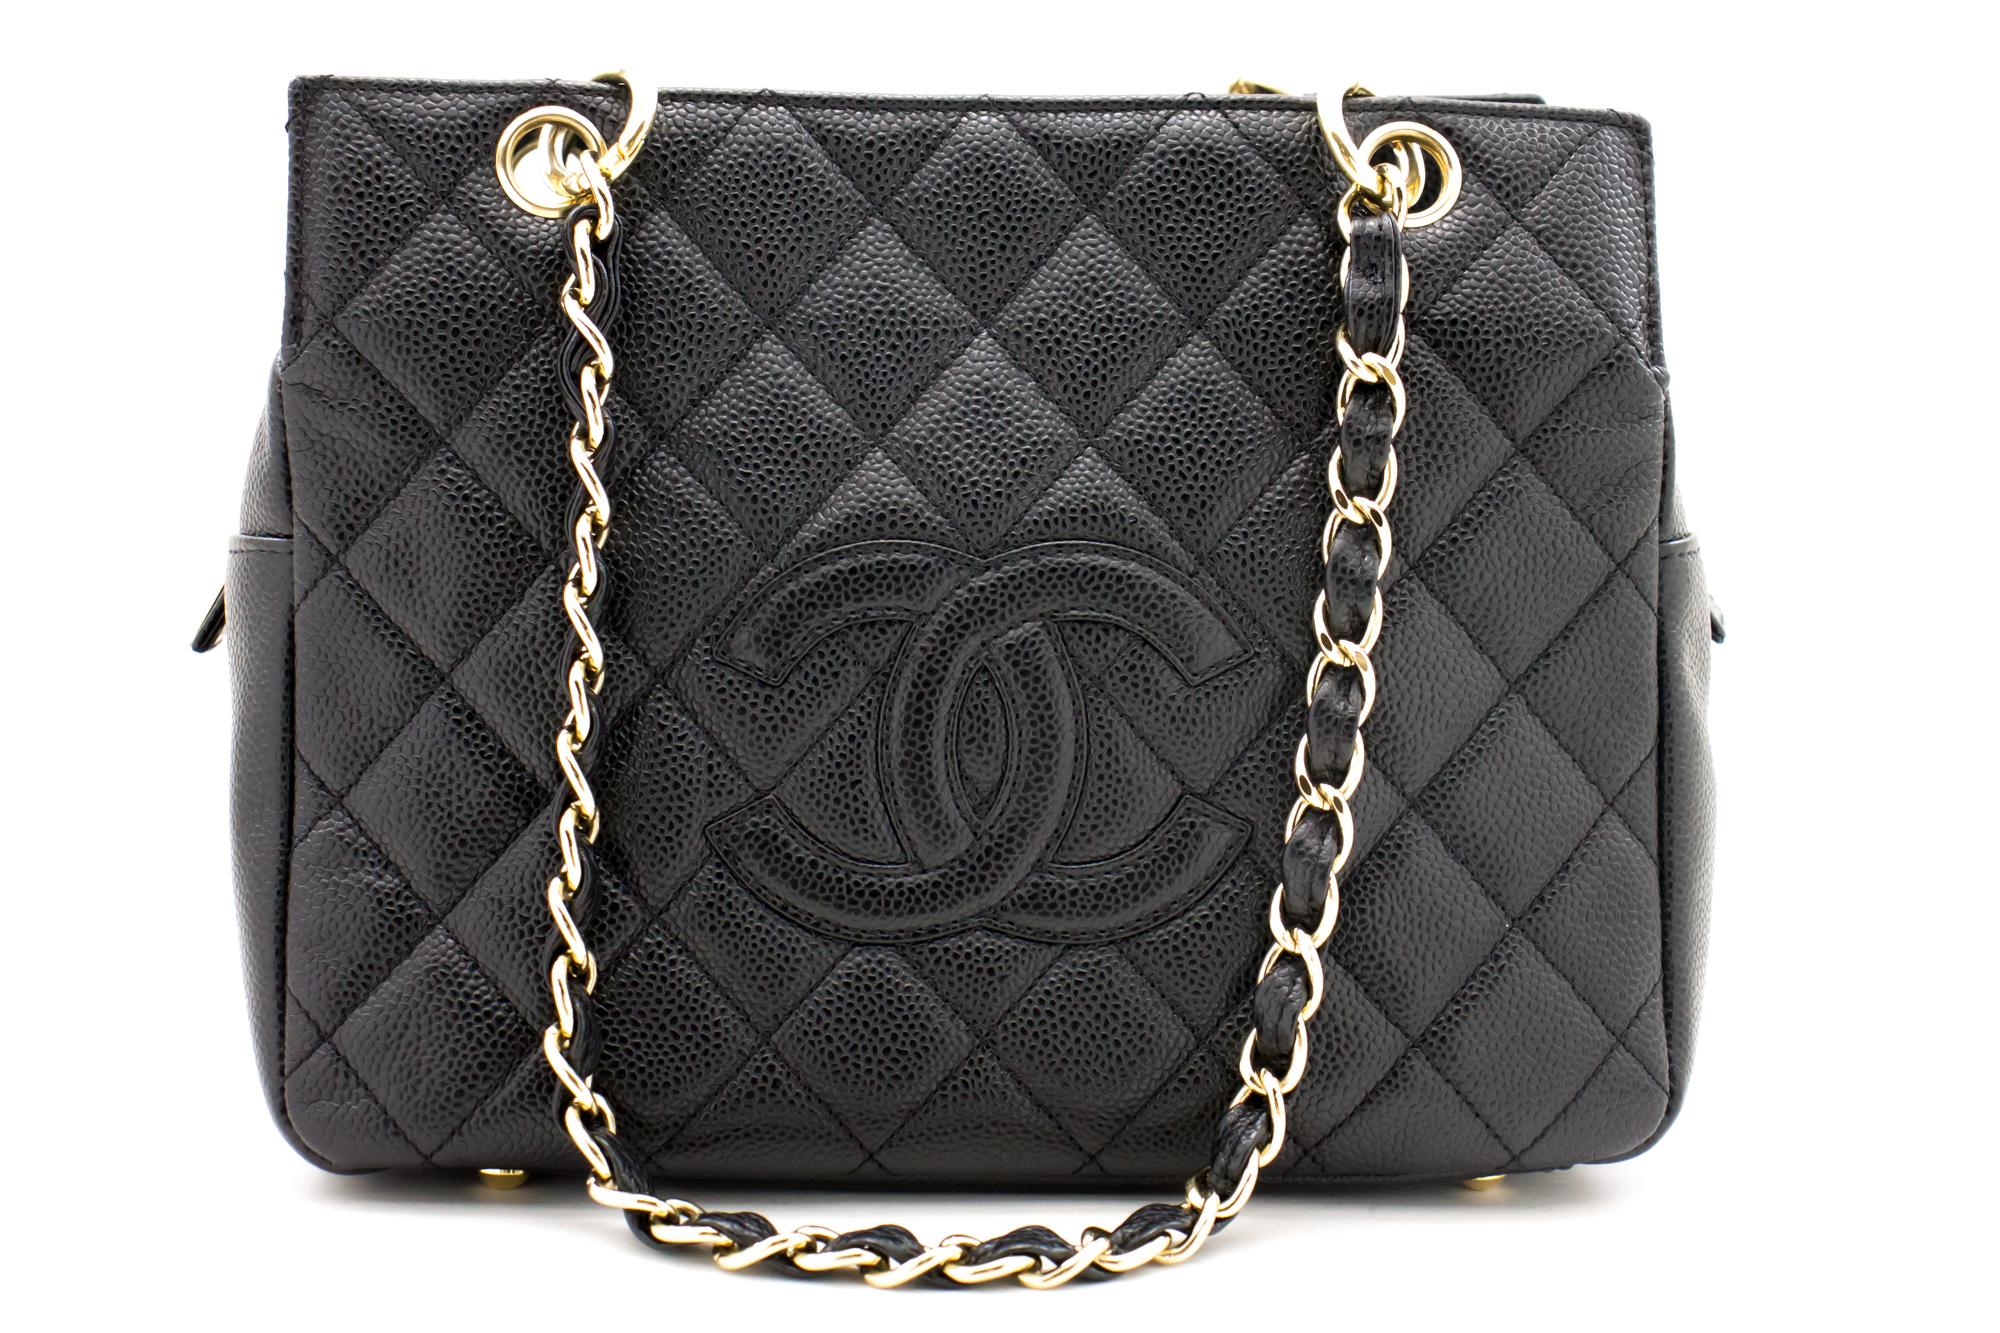 An authentic CHANEL Caviar Chain Shoulder Bag Shopping Tote Black Quilted Purse. The color is Black. The outside material is Leather. The pattern is Solid. This item is Contemporary. The year of manufacture would be 2 0 0 2 .
Conditions &